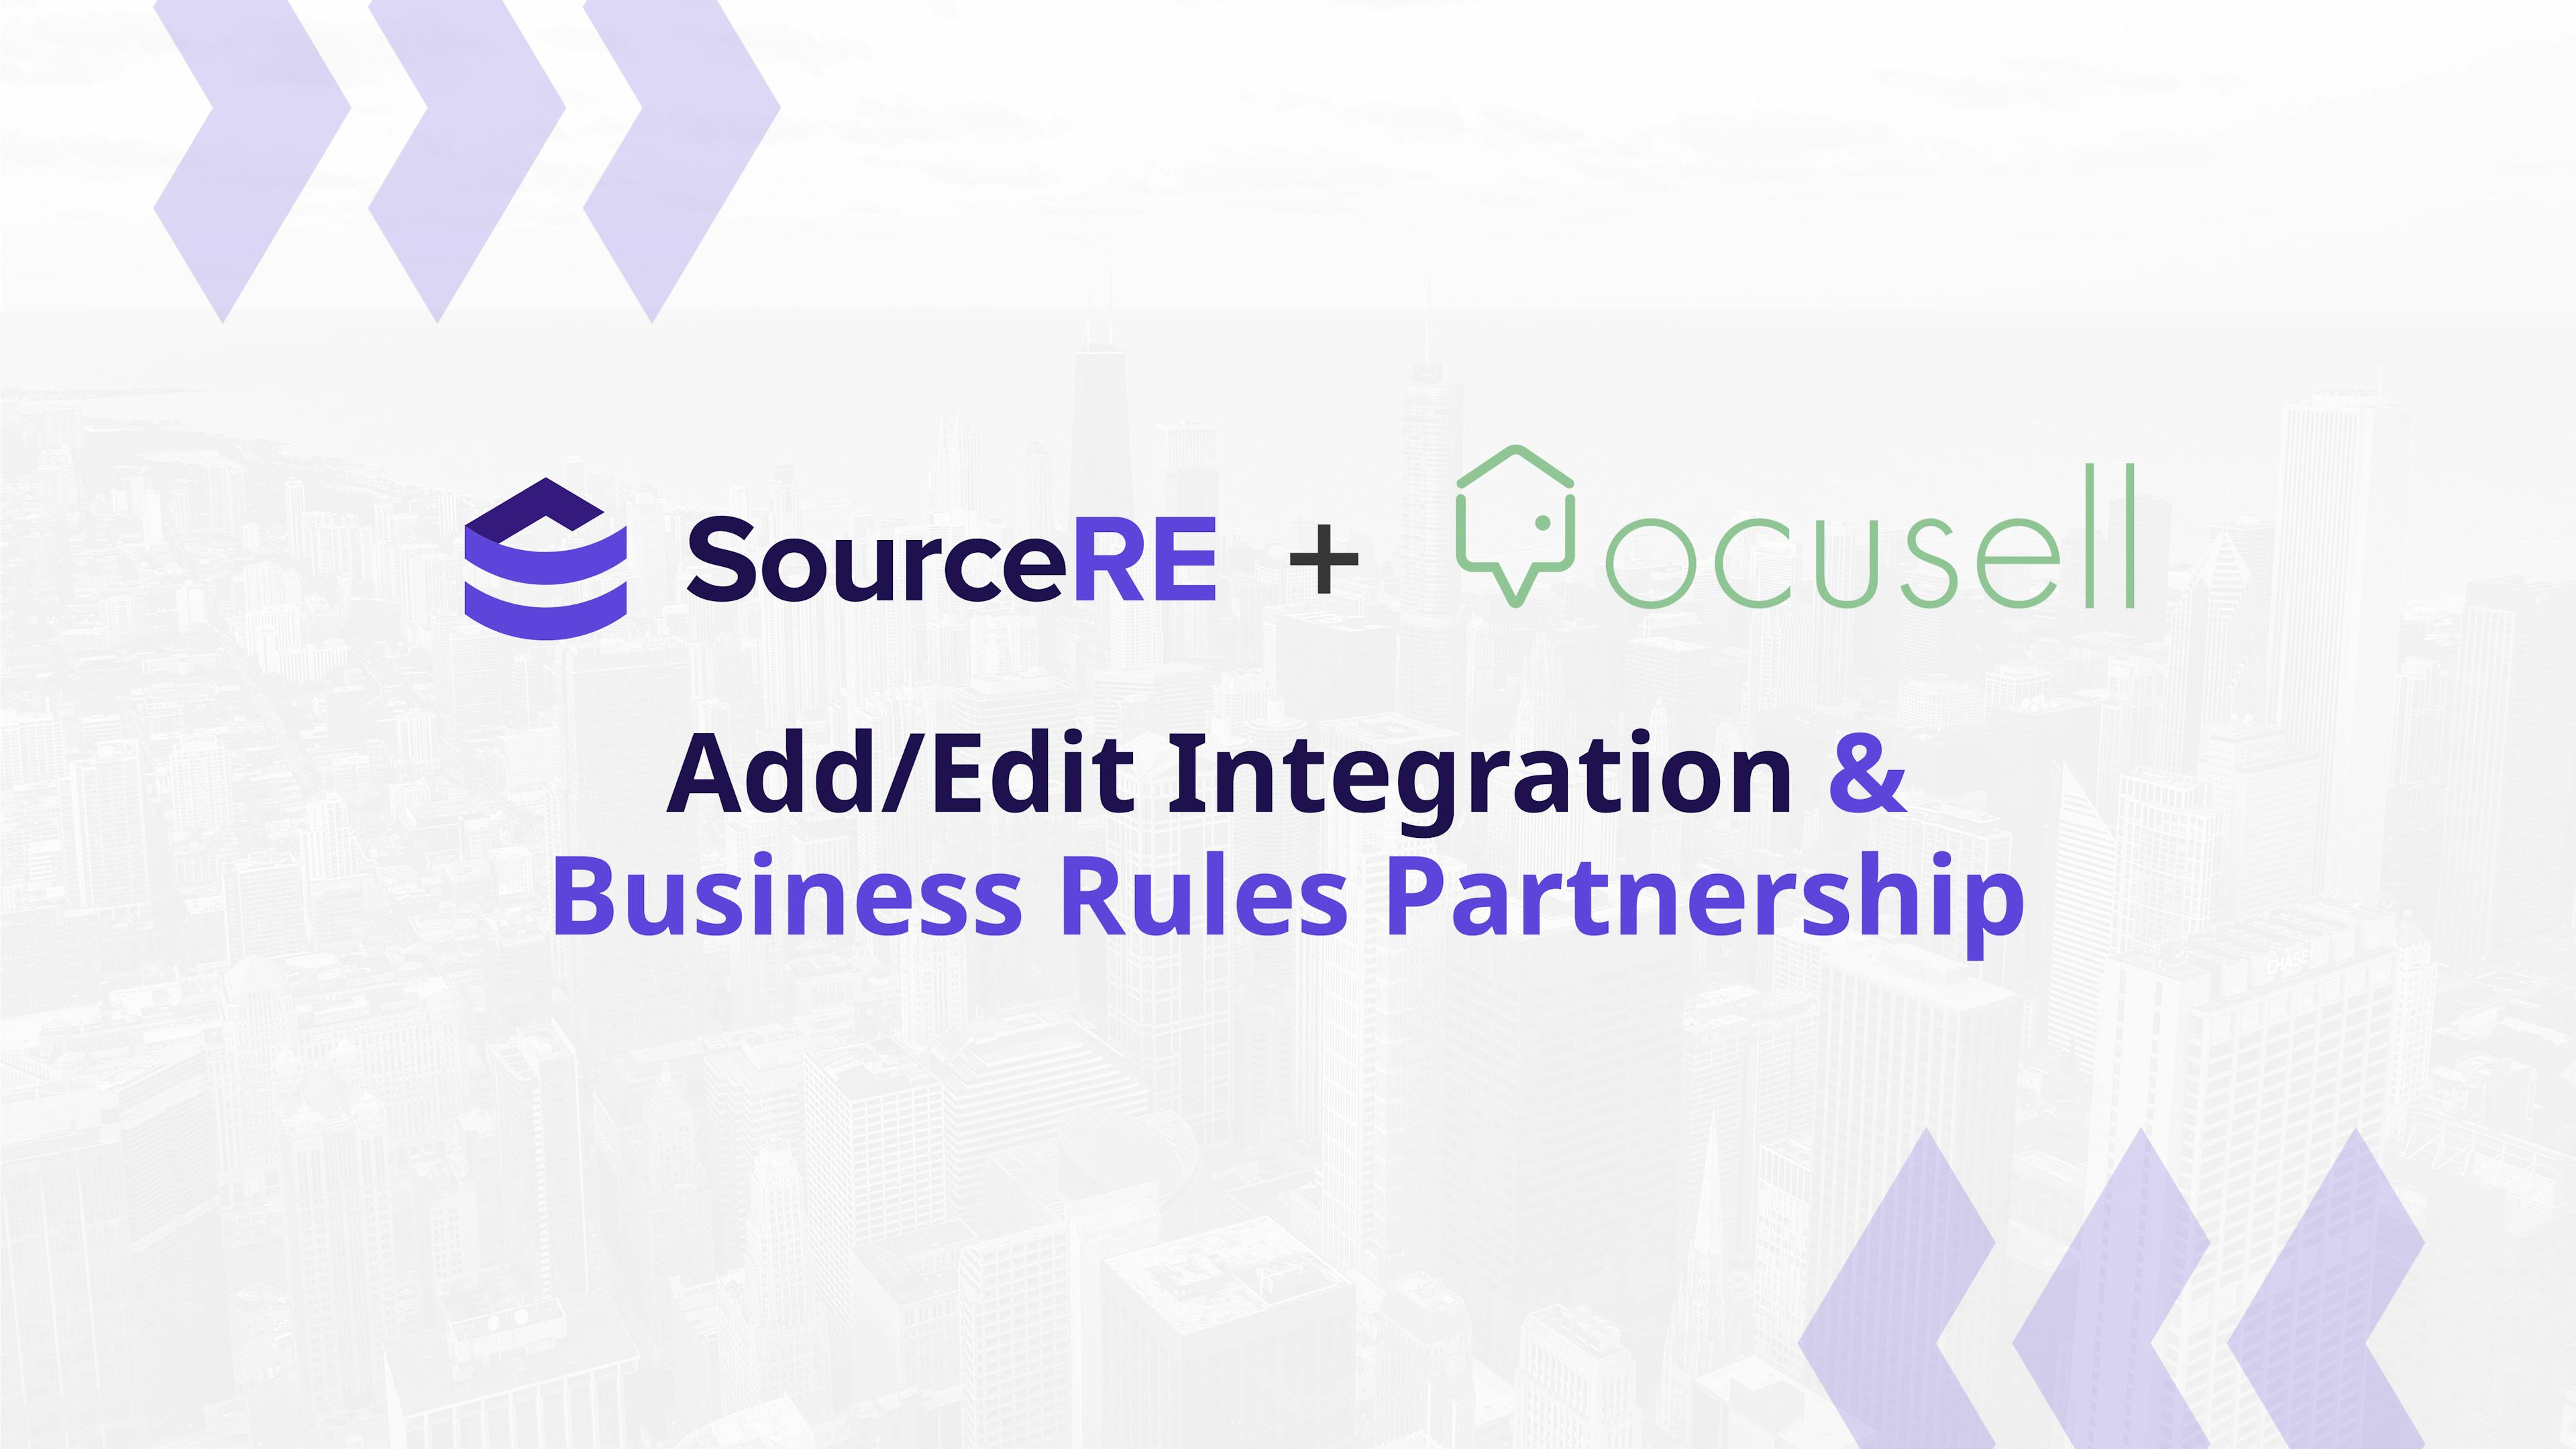 Ocusell and SourceRE Announce Add/Edit Integration and Business Rules Partnership header image